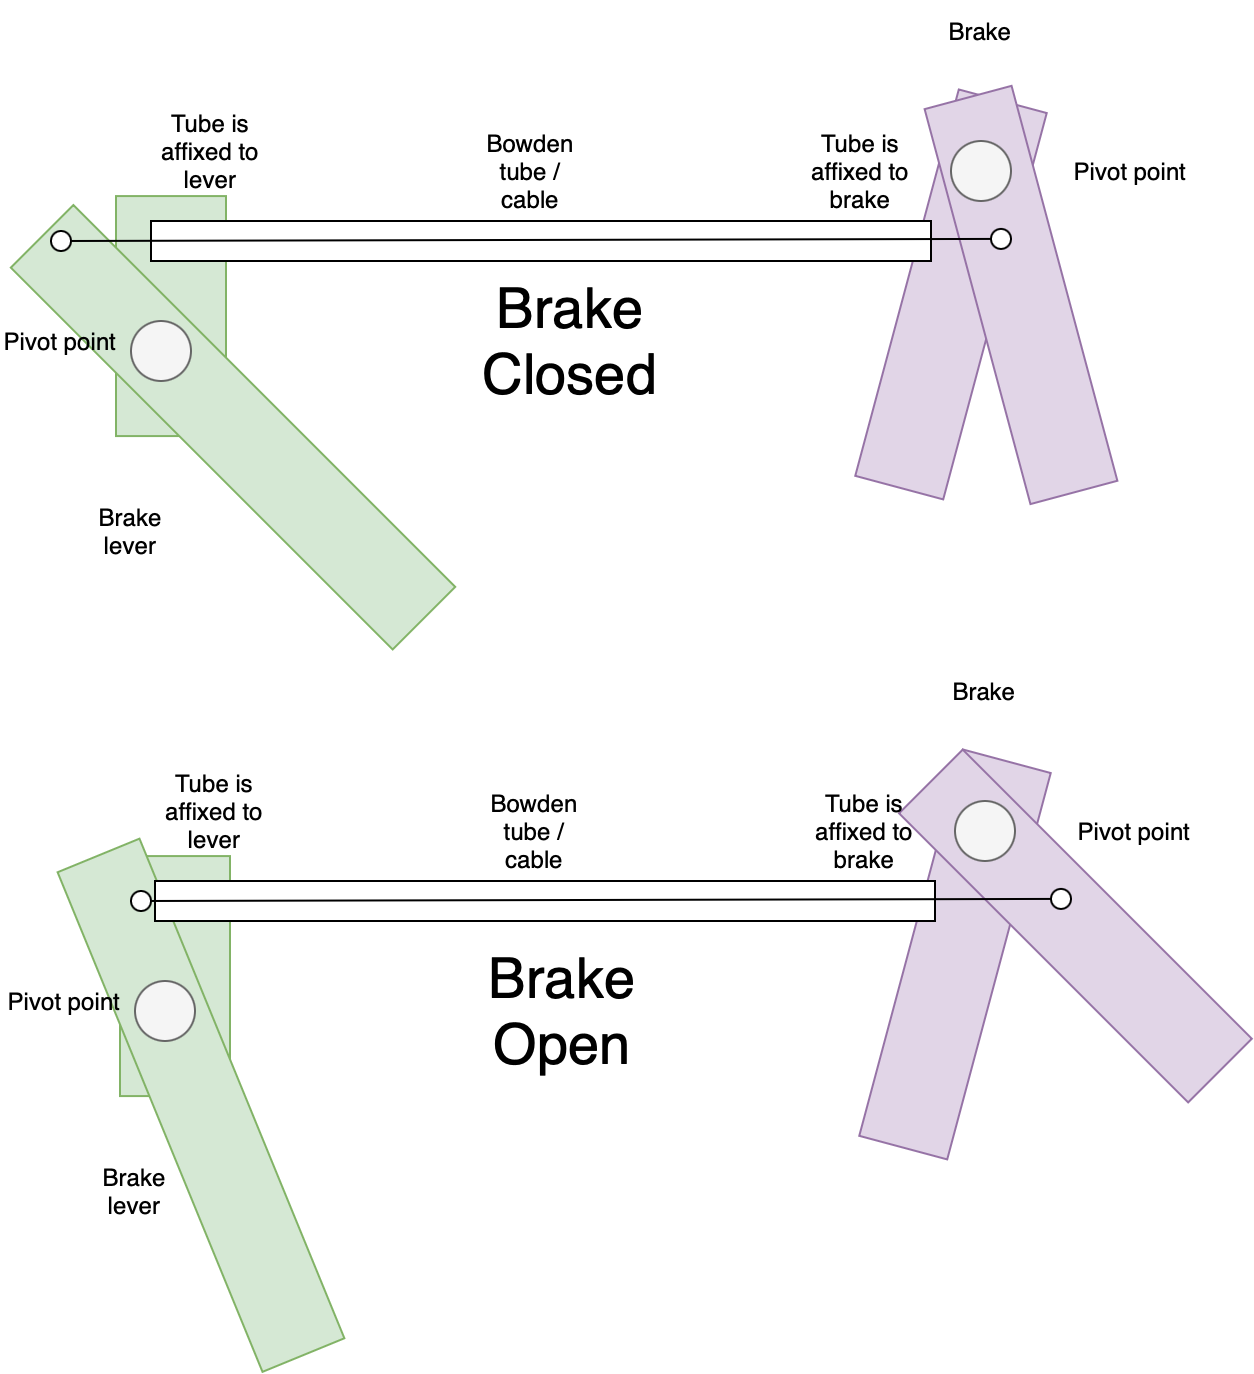 Diagram showing brake lever pivot points, fixed bowden tube and brakes. When the brake is closed the lever pulls on the wire in the bowden tube which in turn pulls the brakes shut